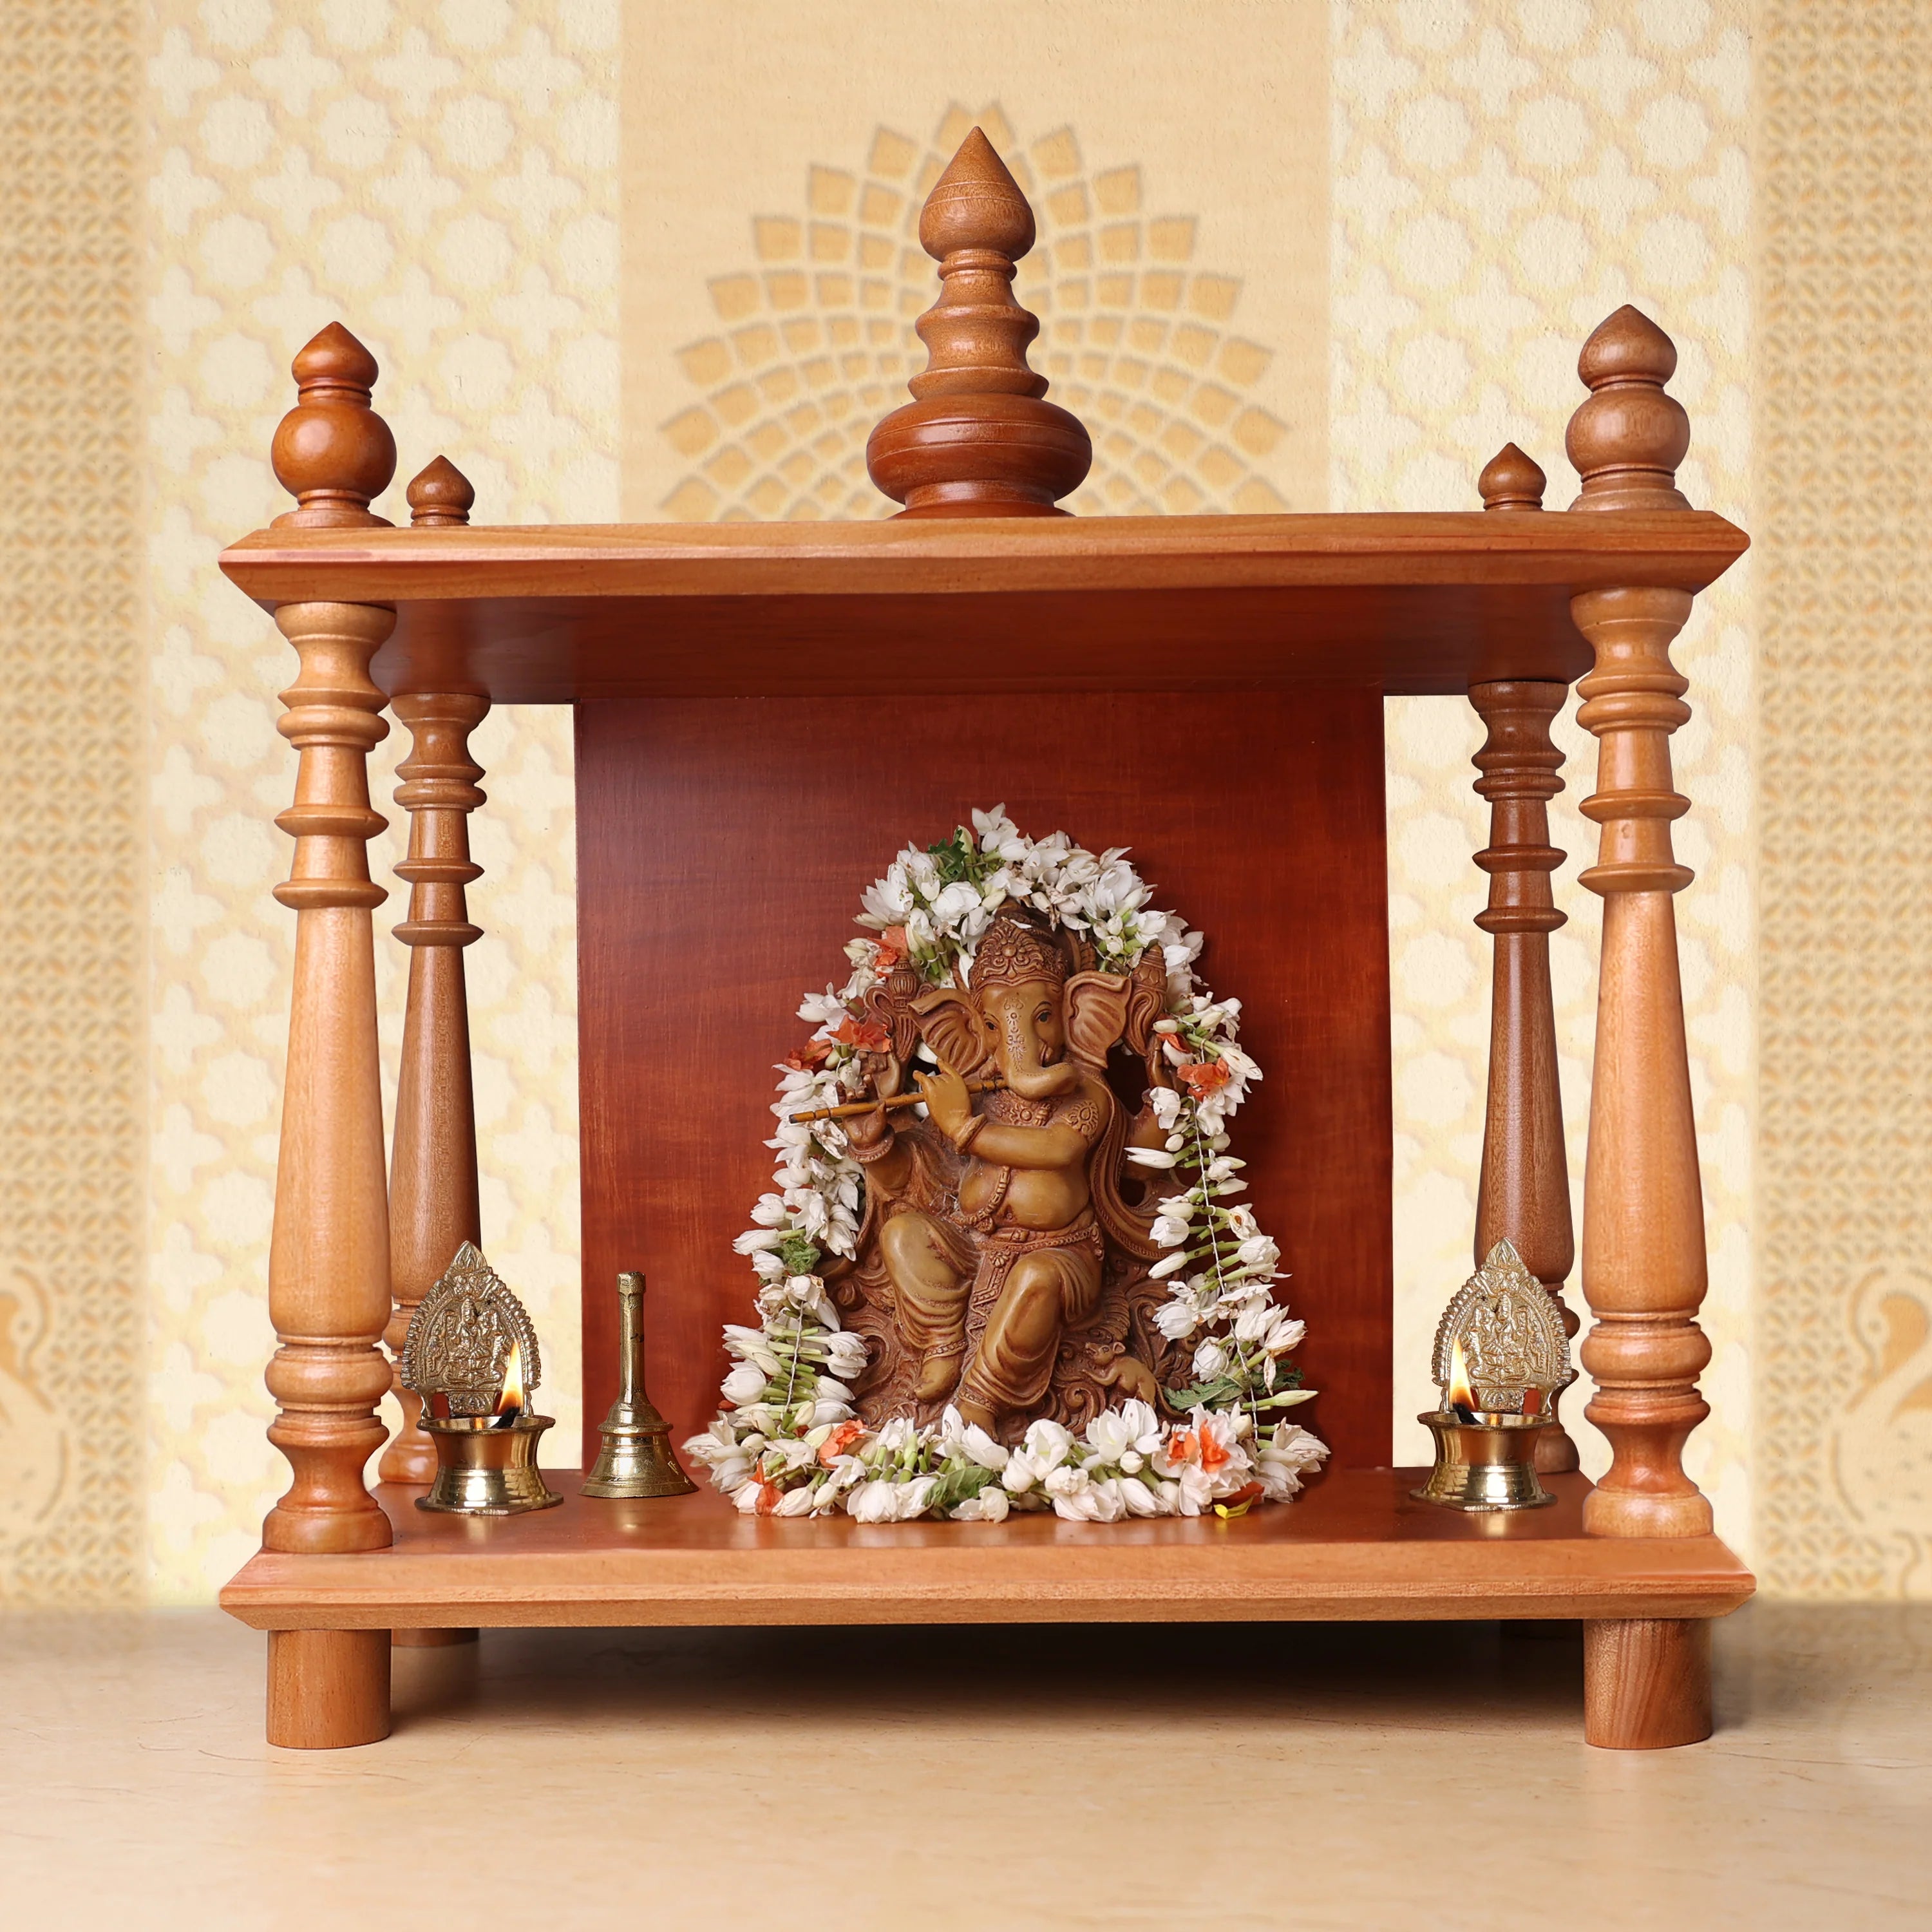 The Significance of Mantapa in Hindu Puja Rooms